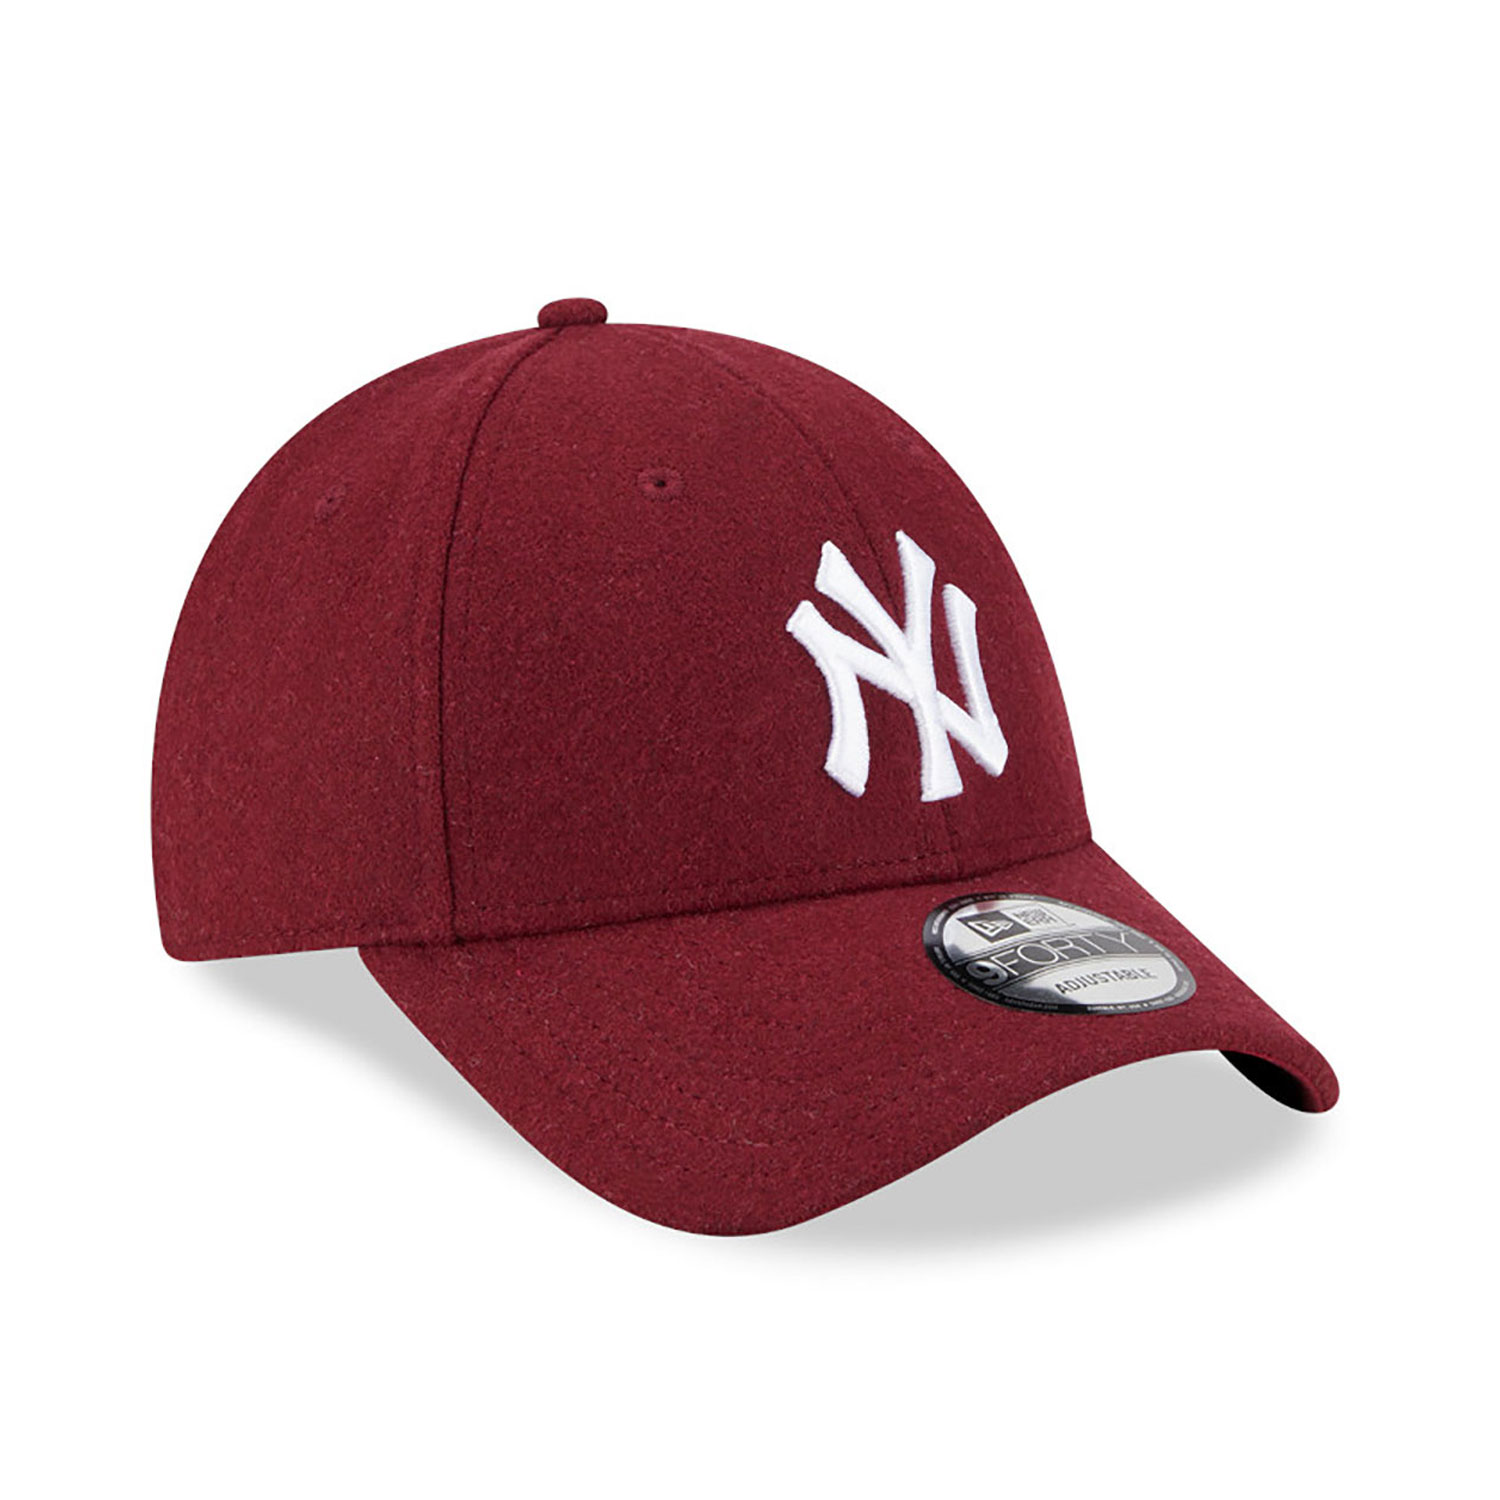 New York Yankees Melton Wool Red 9FORTY Adjustable Cap